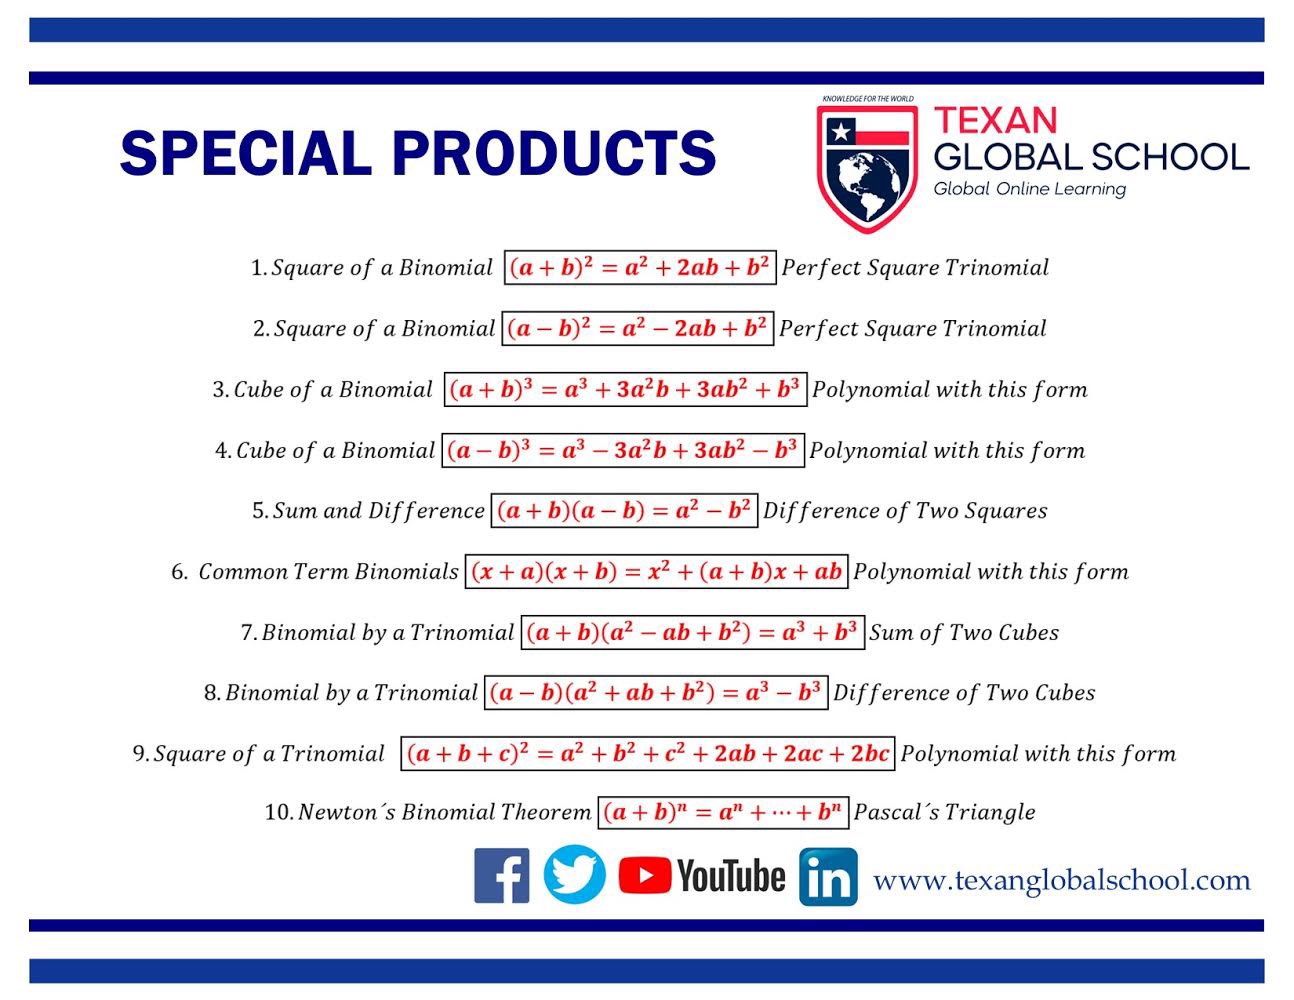 SpecialProducts